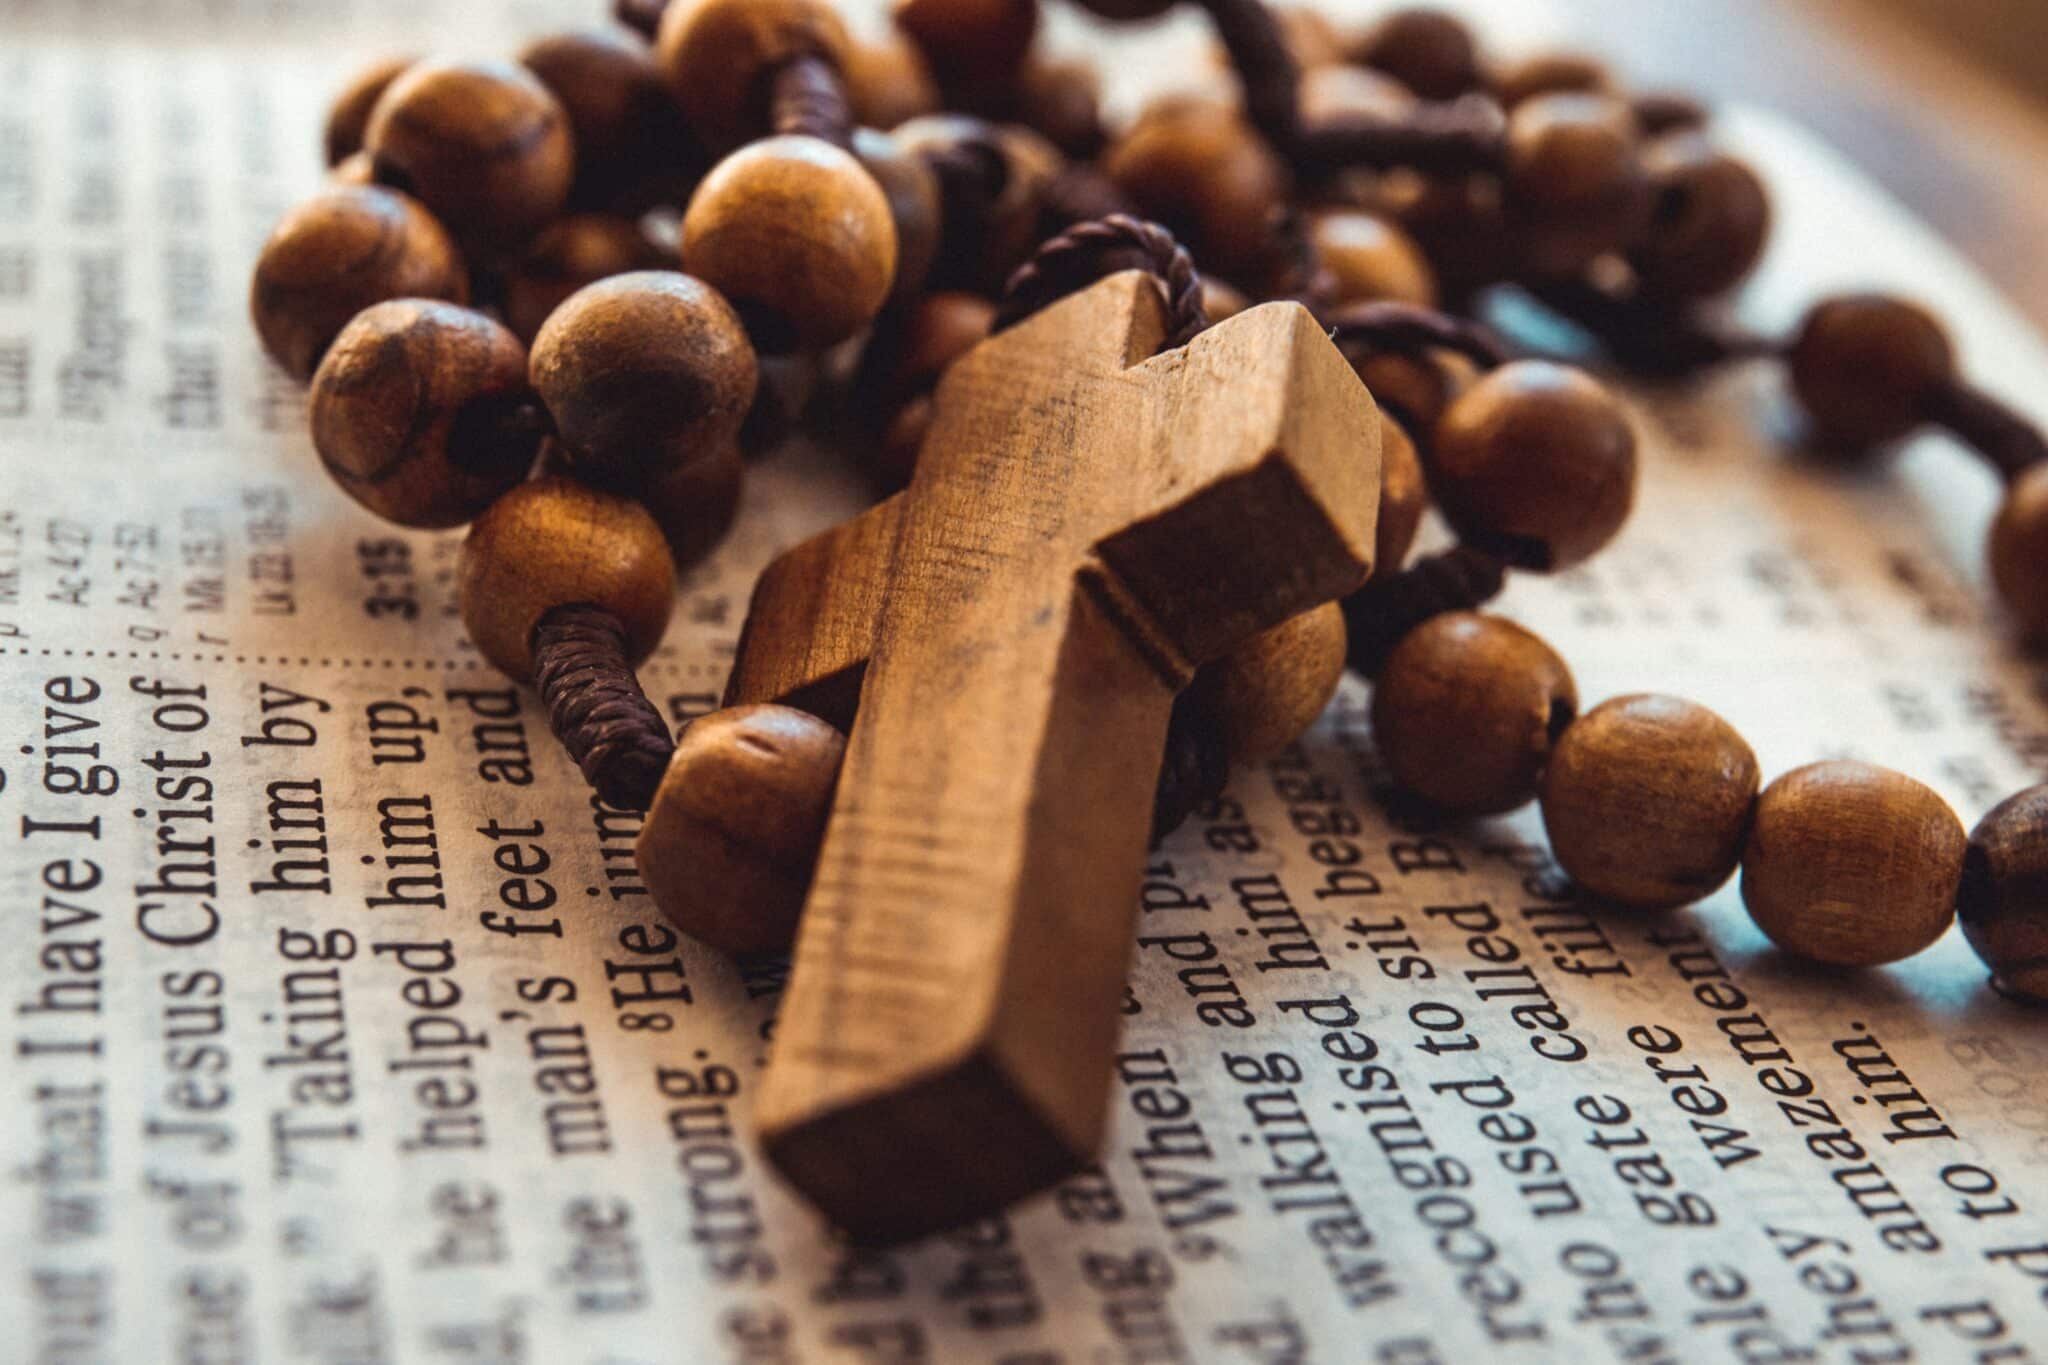 rosary on a bible | Photo by James Coleman on Unsplash